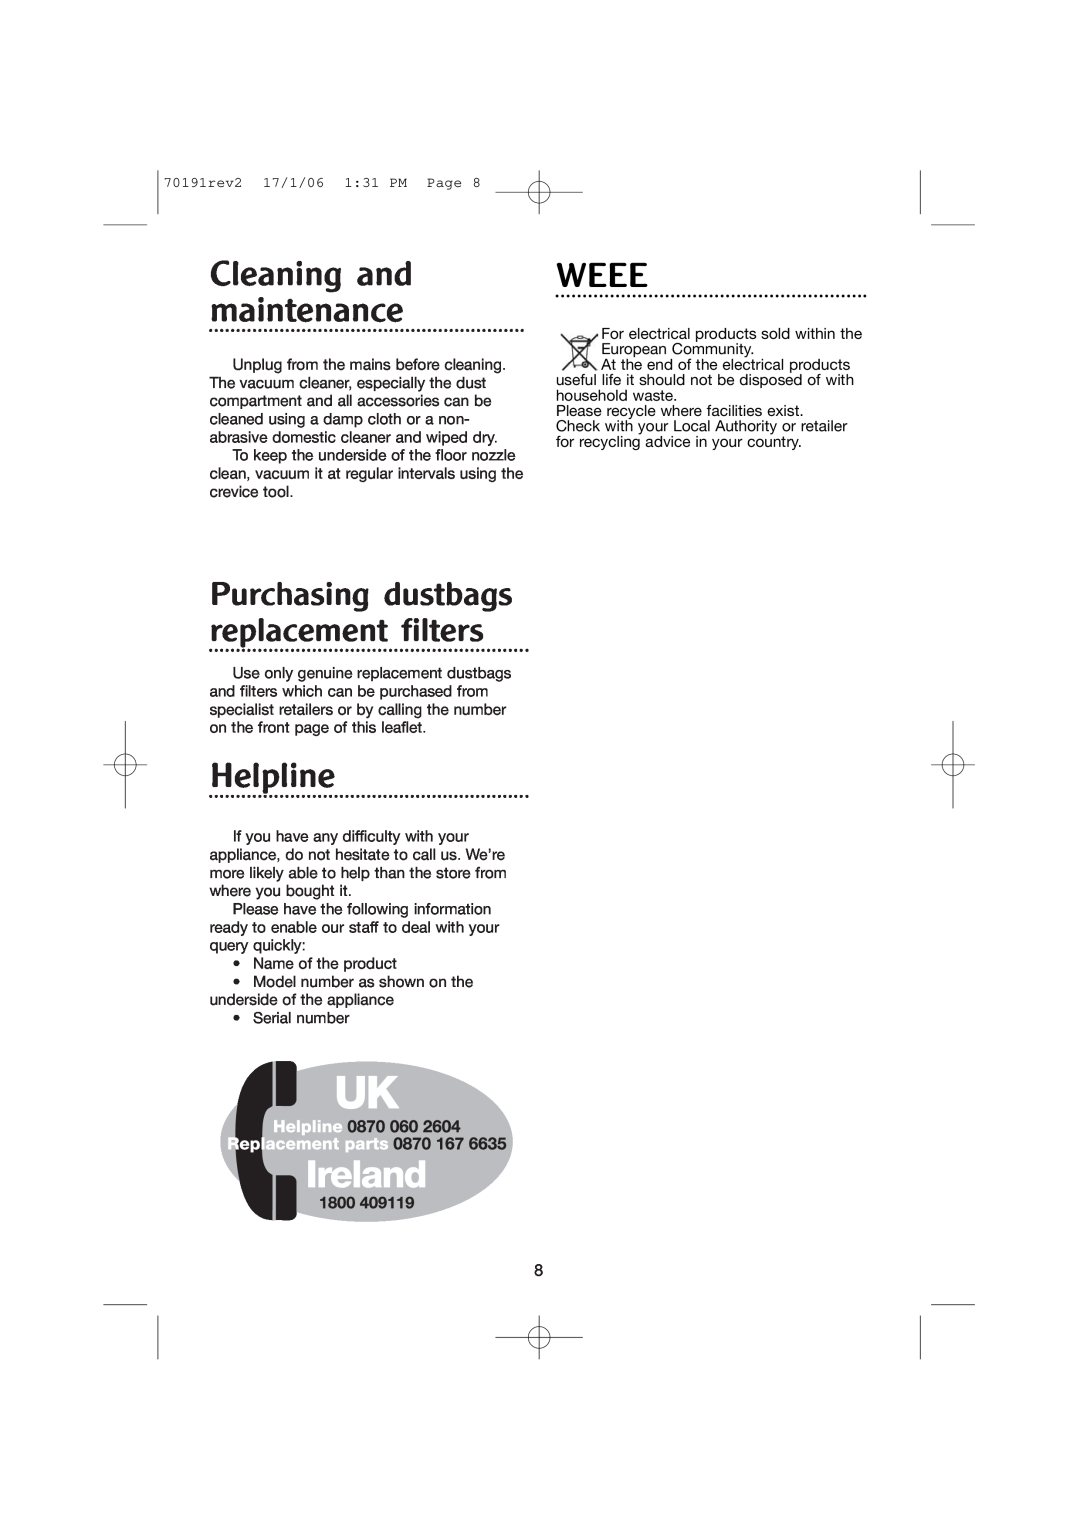 Morphy Richards 70191REV2 manual Cleaning and maintenance, Weee, Helpline, Purchasing dustbags replacement filters 